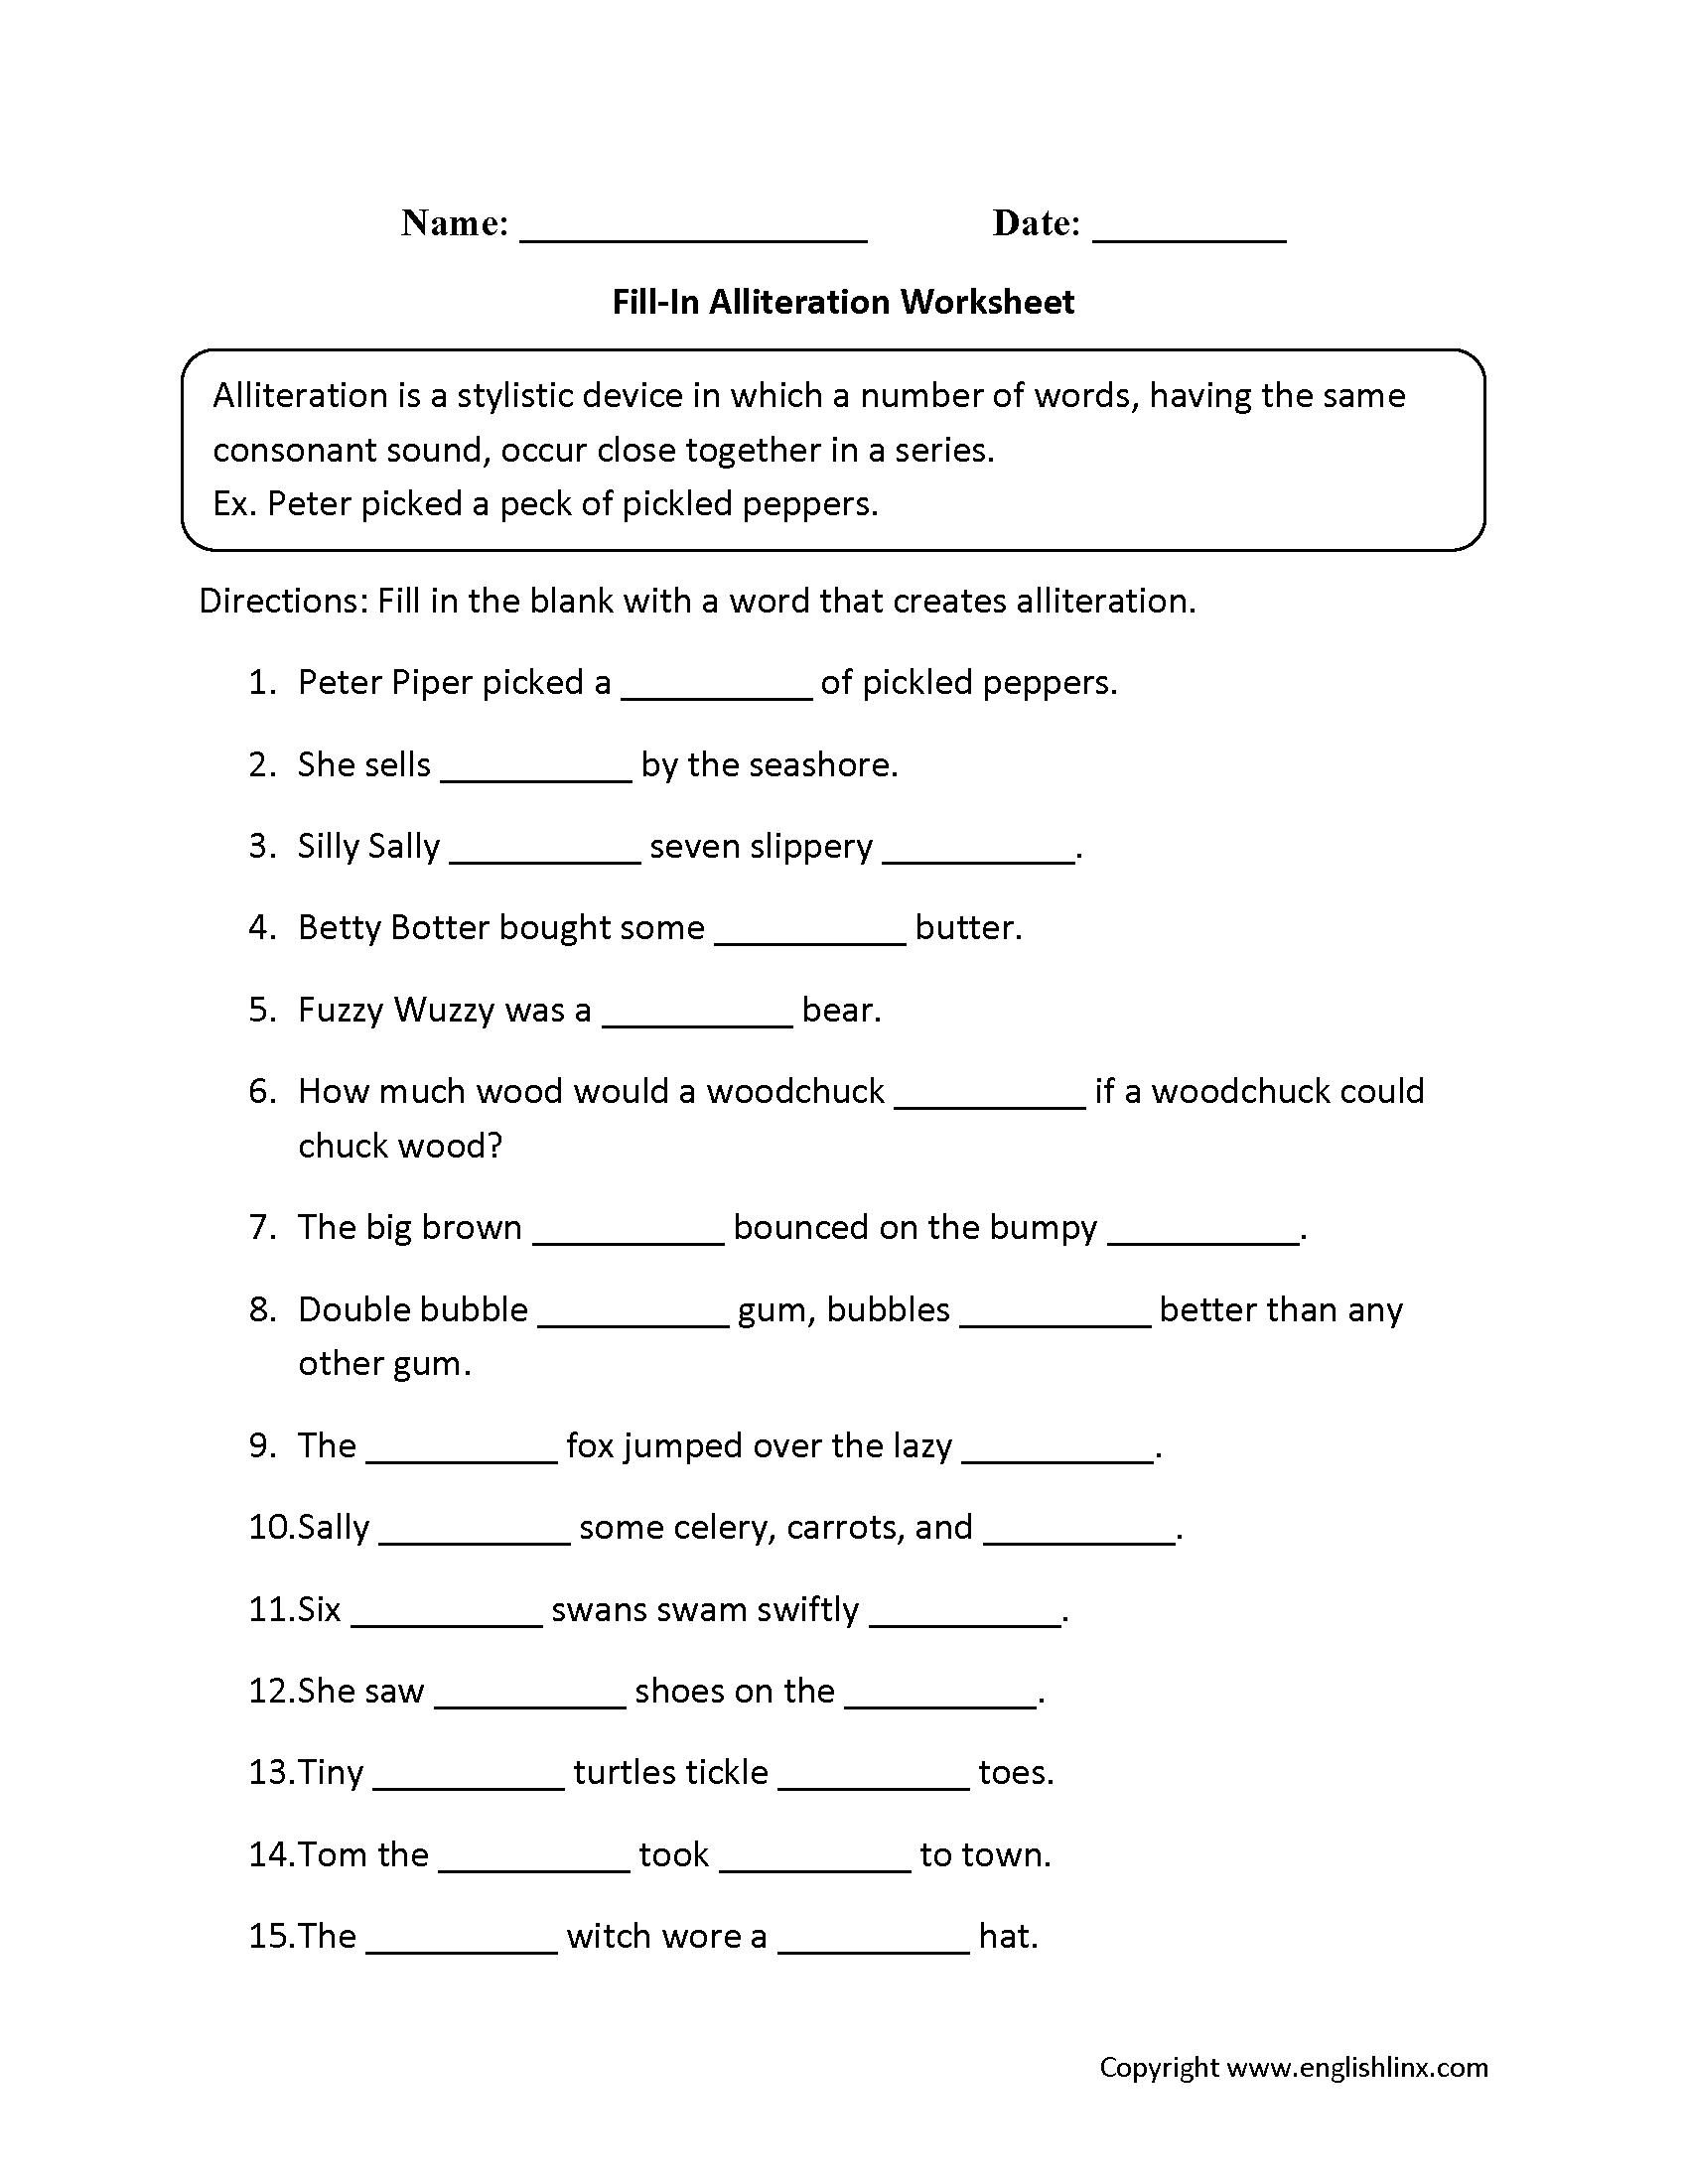 Fill In Alliteration Worksheets